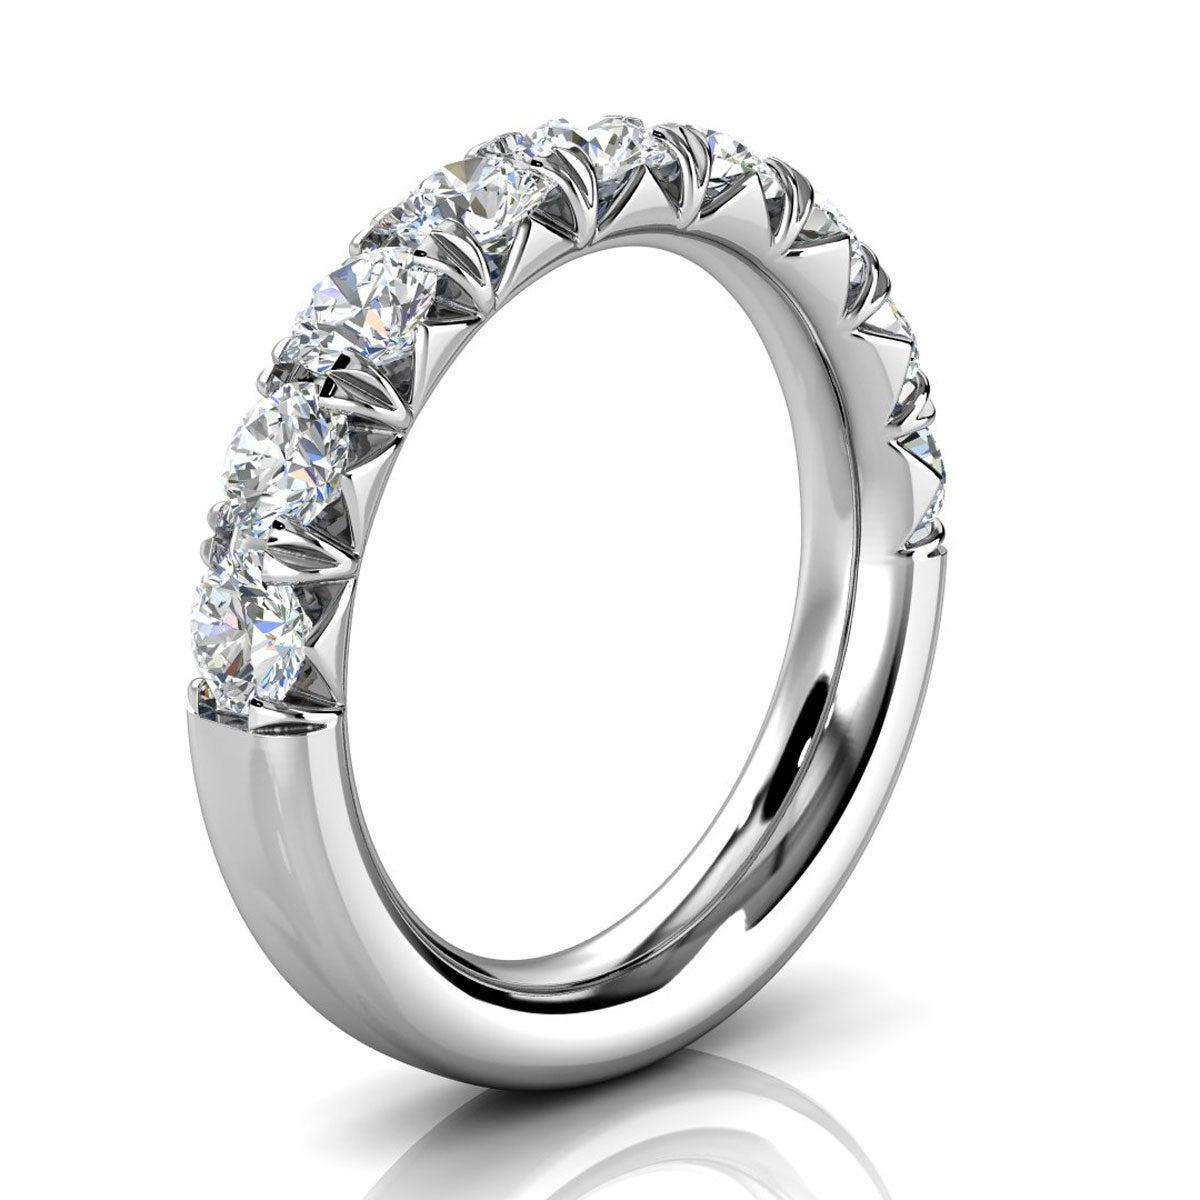 For Sale:  14k White Gold Voyage French Pave Diamond Ring '1 1/2 Ct. Tw' 2